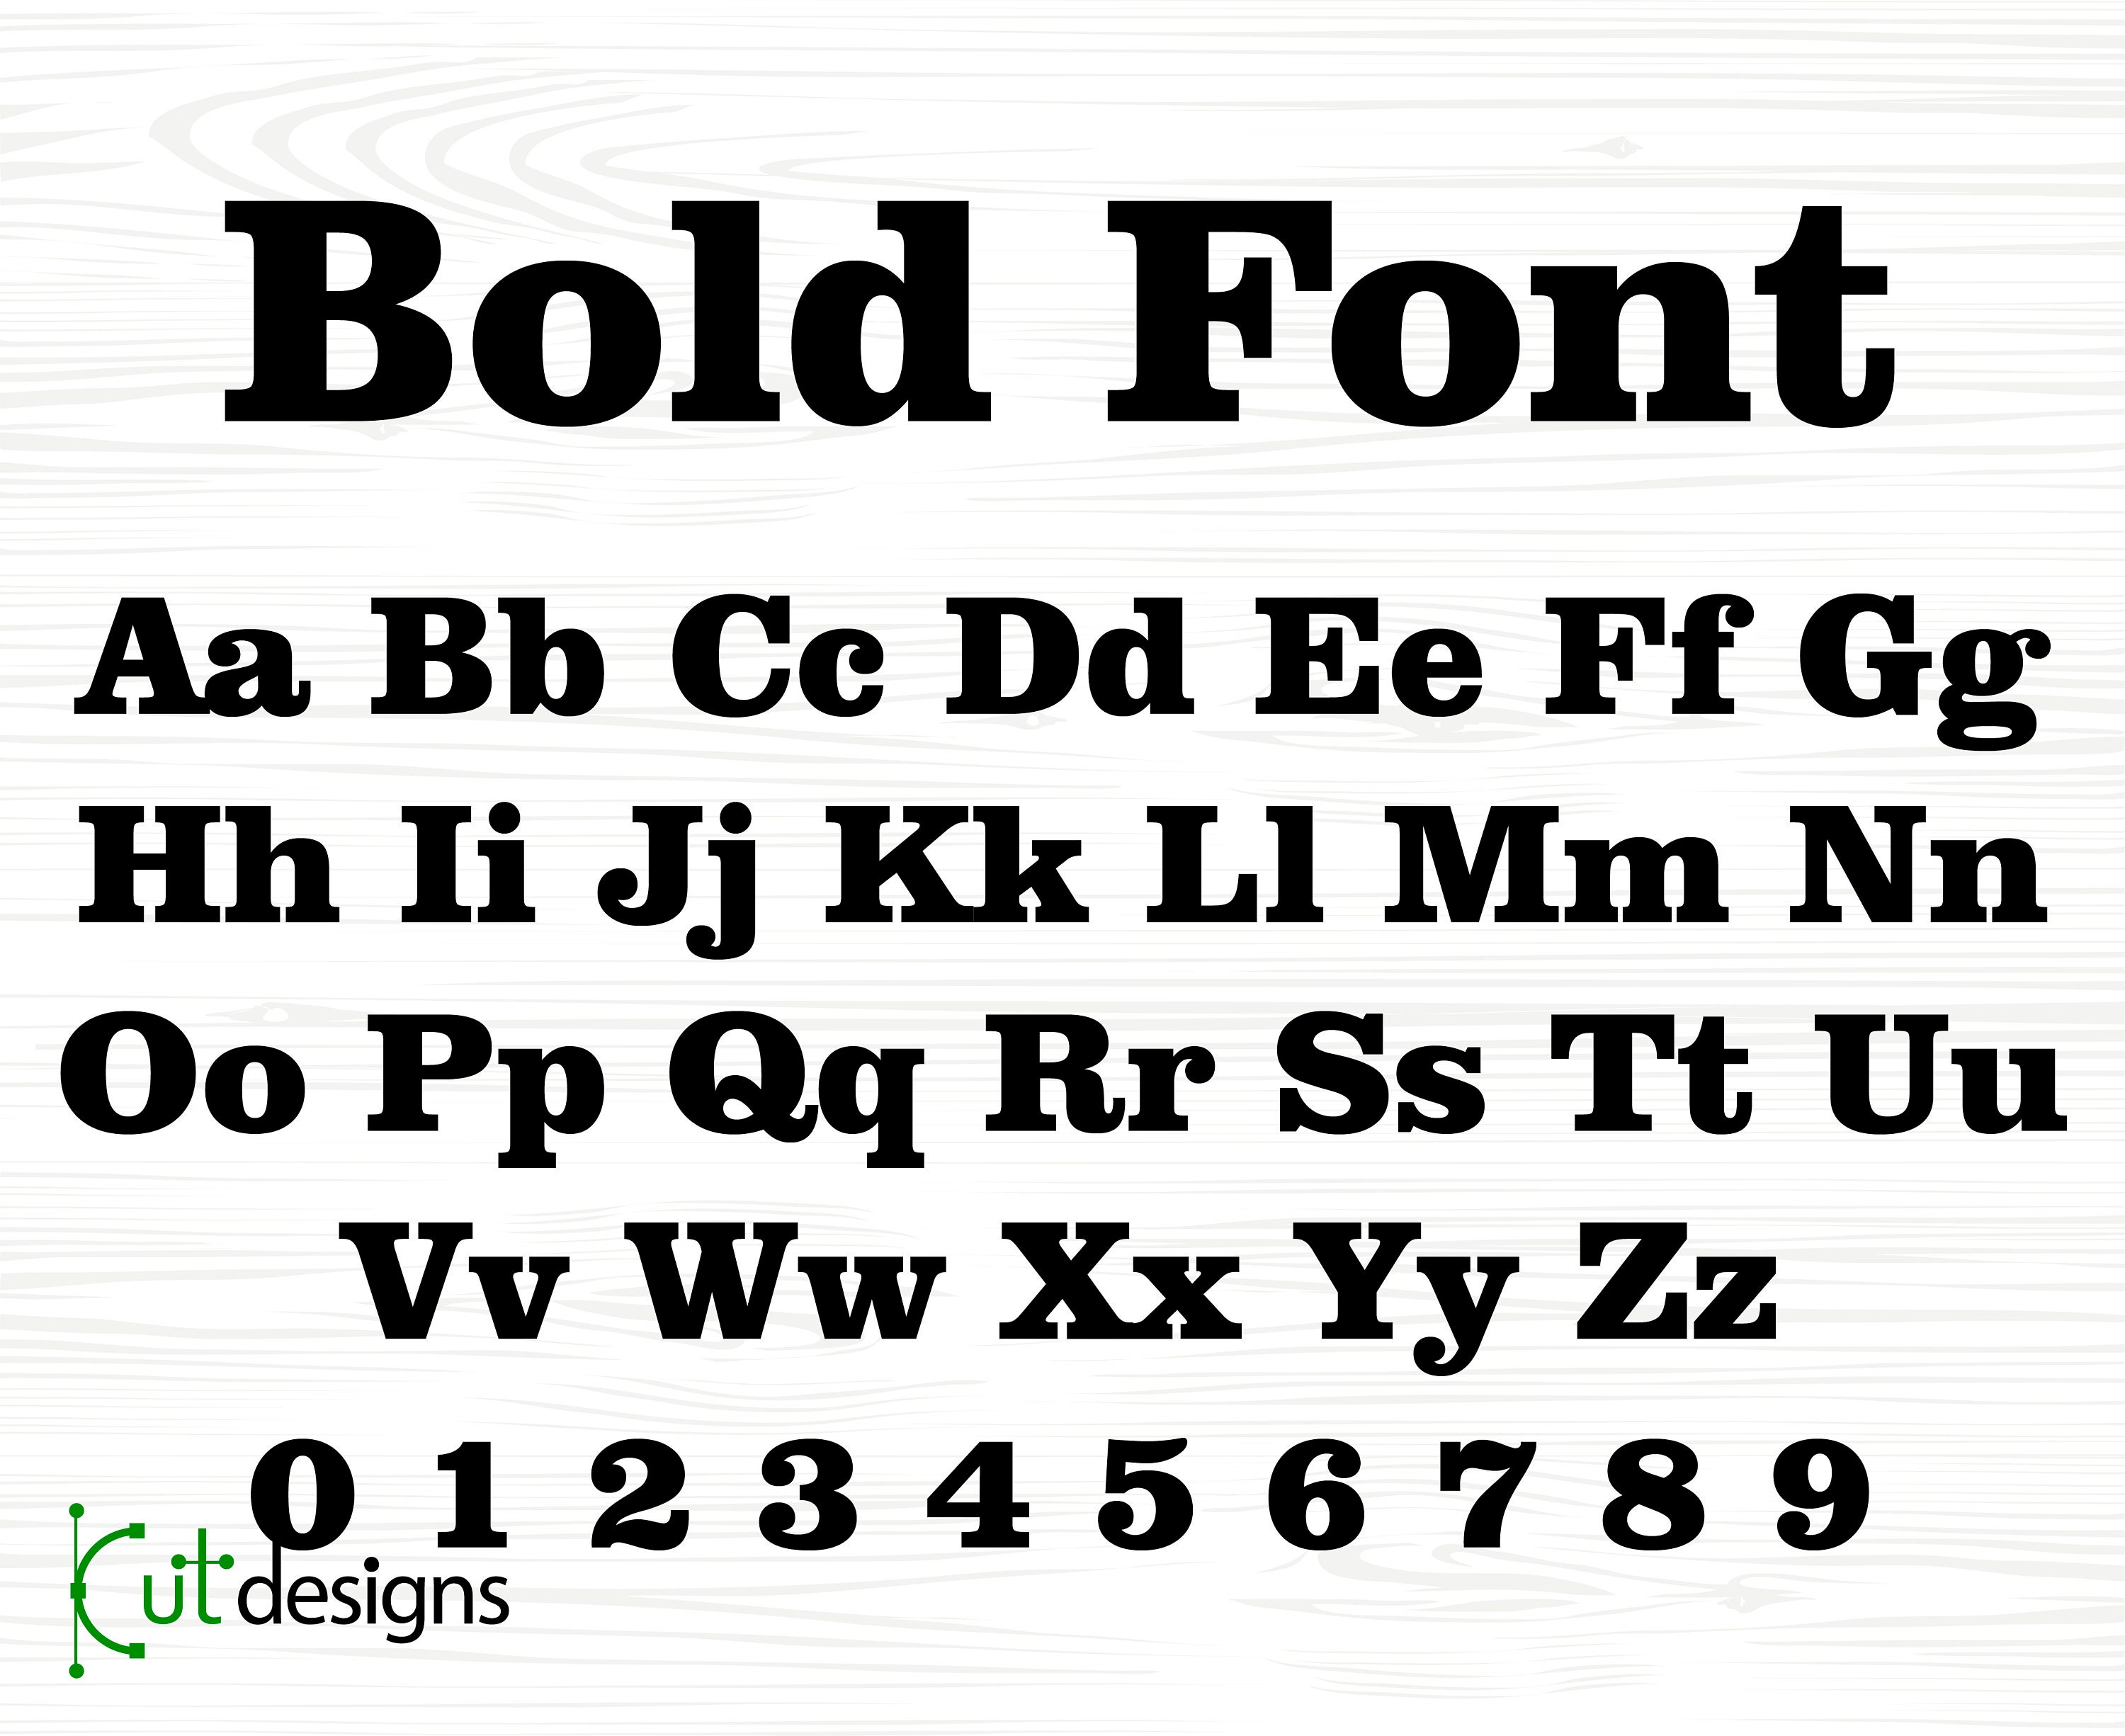 Template Lettering Guide Bold 3/4